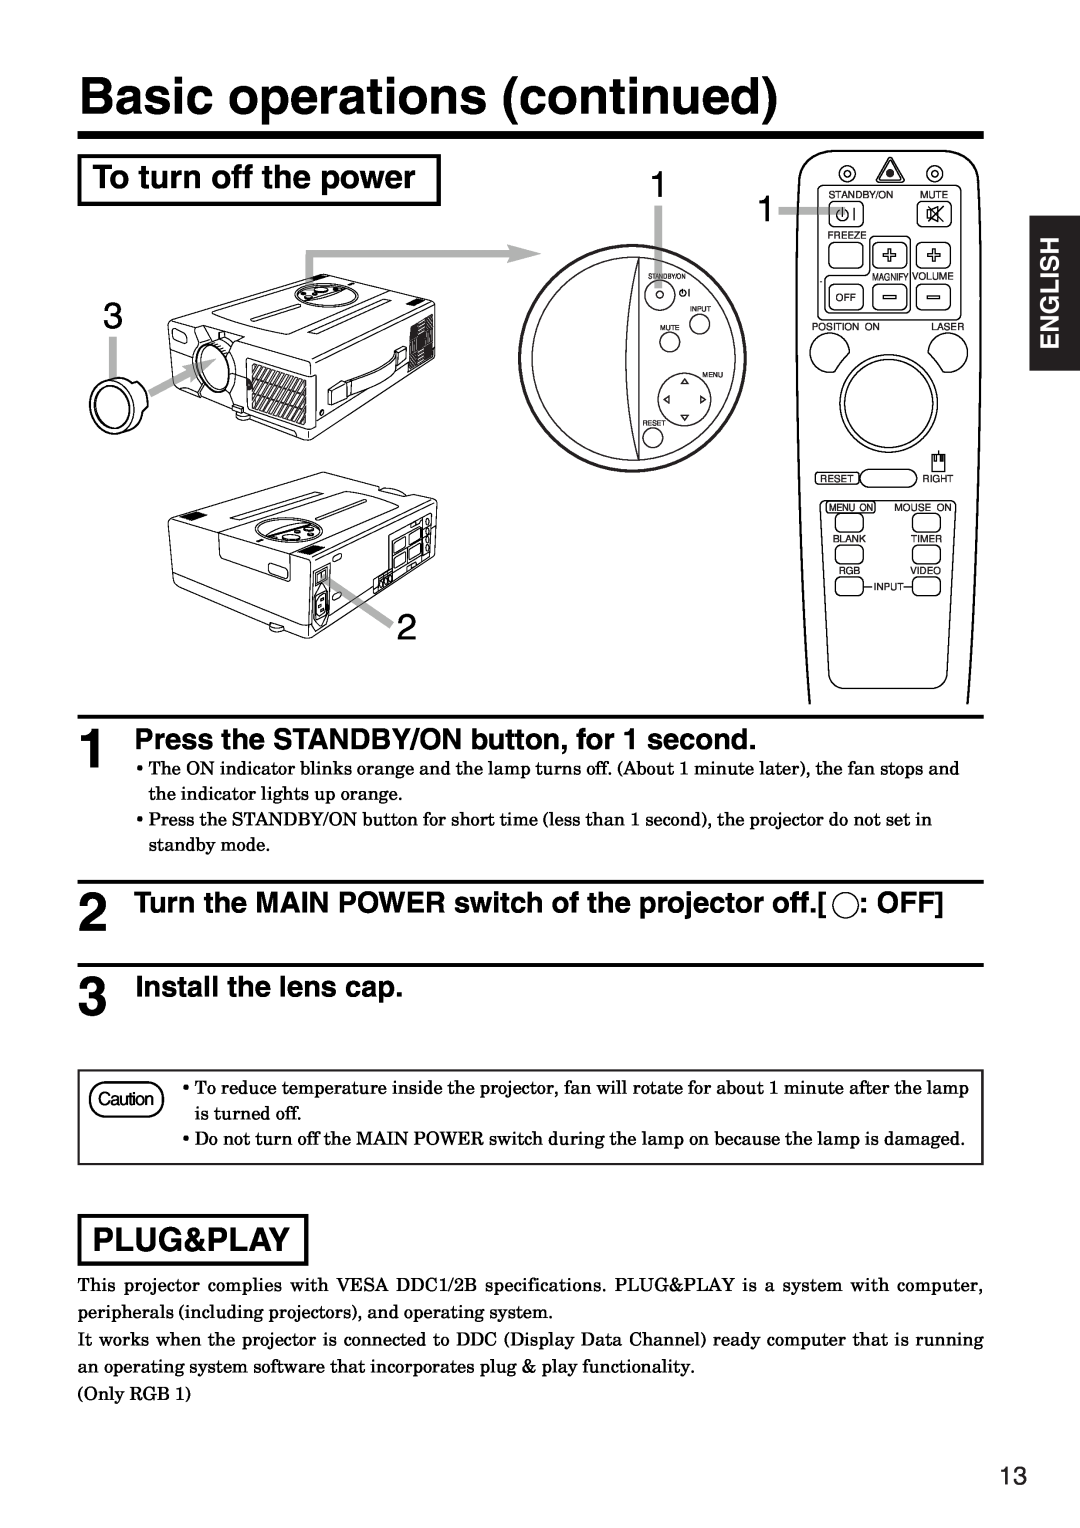 Hitachi CP-X935W Basic operations continued, To turn off the power, Plug&Play, Press the STANDBY/ON button, for 1 second 